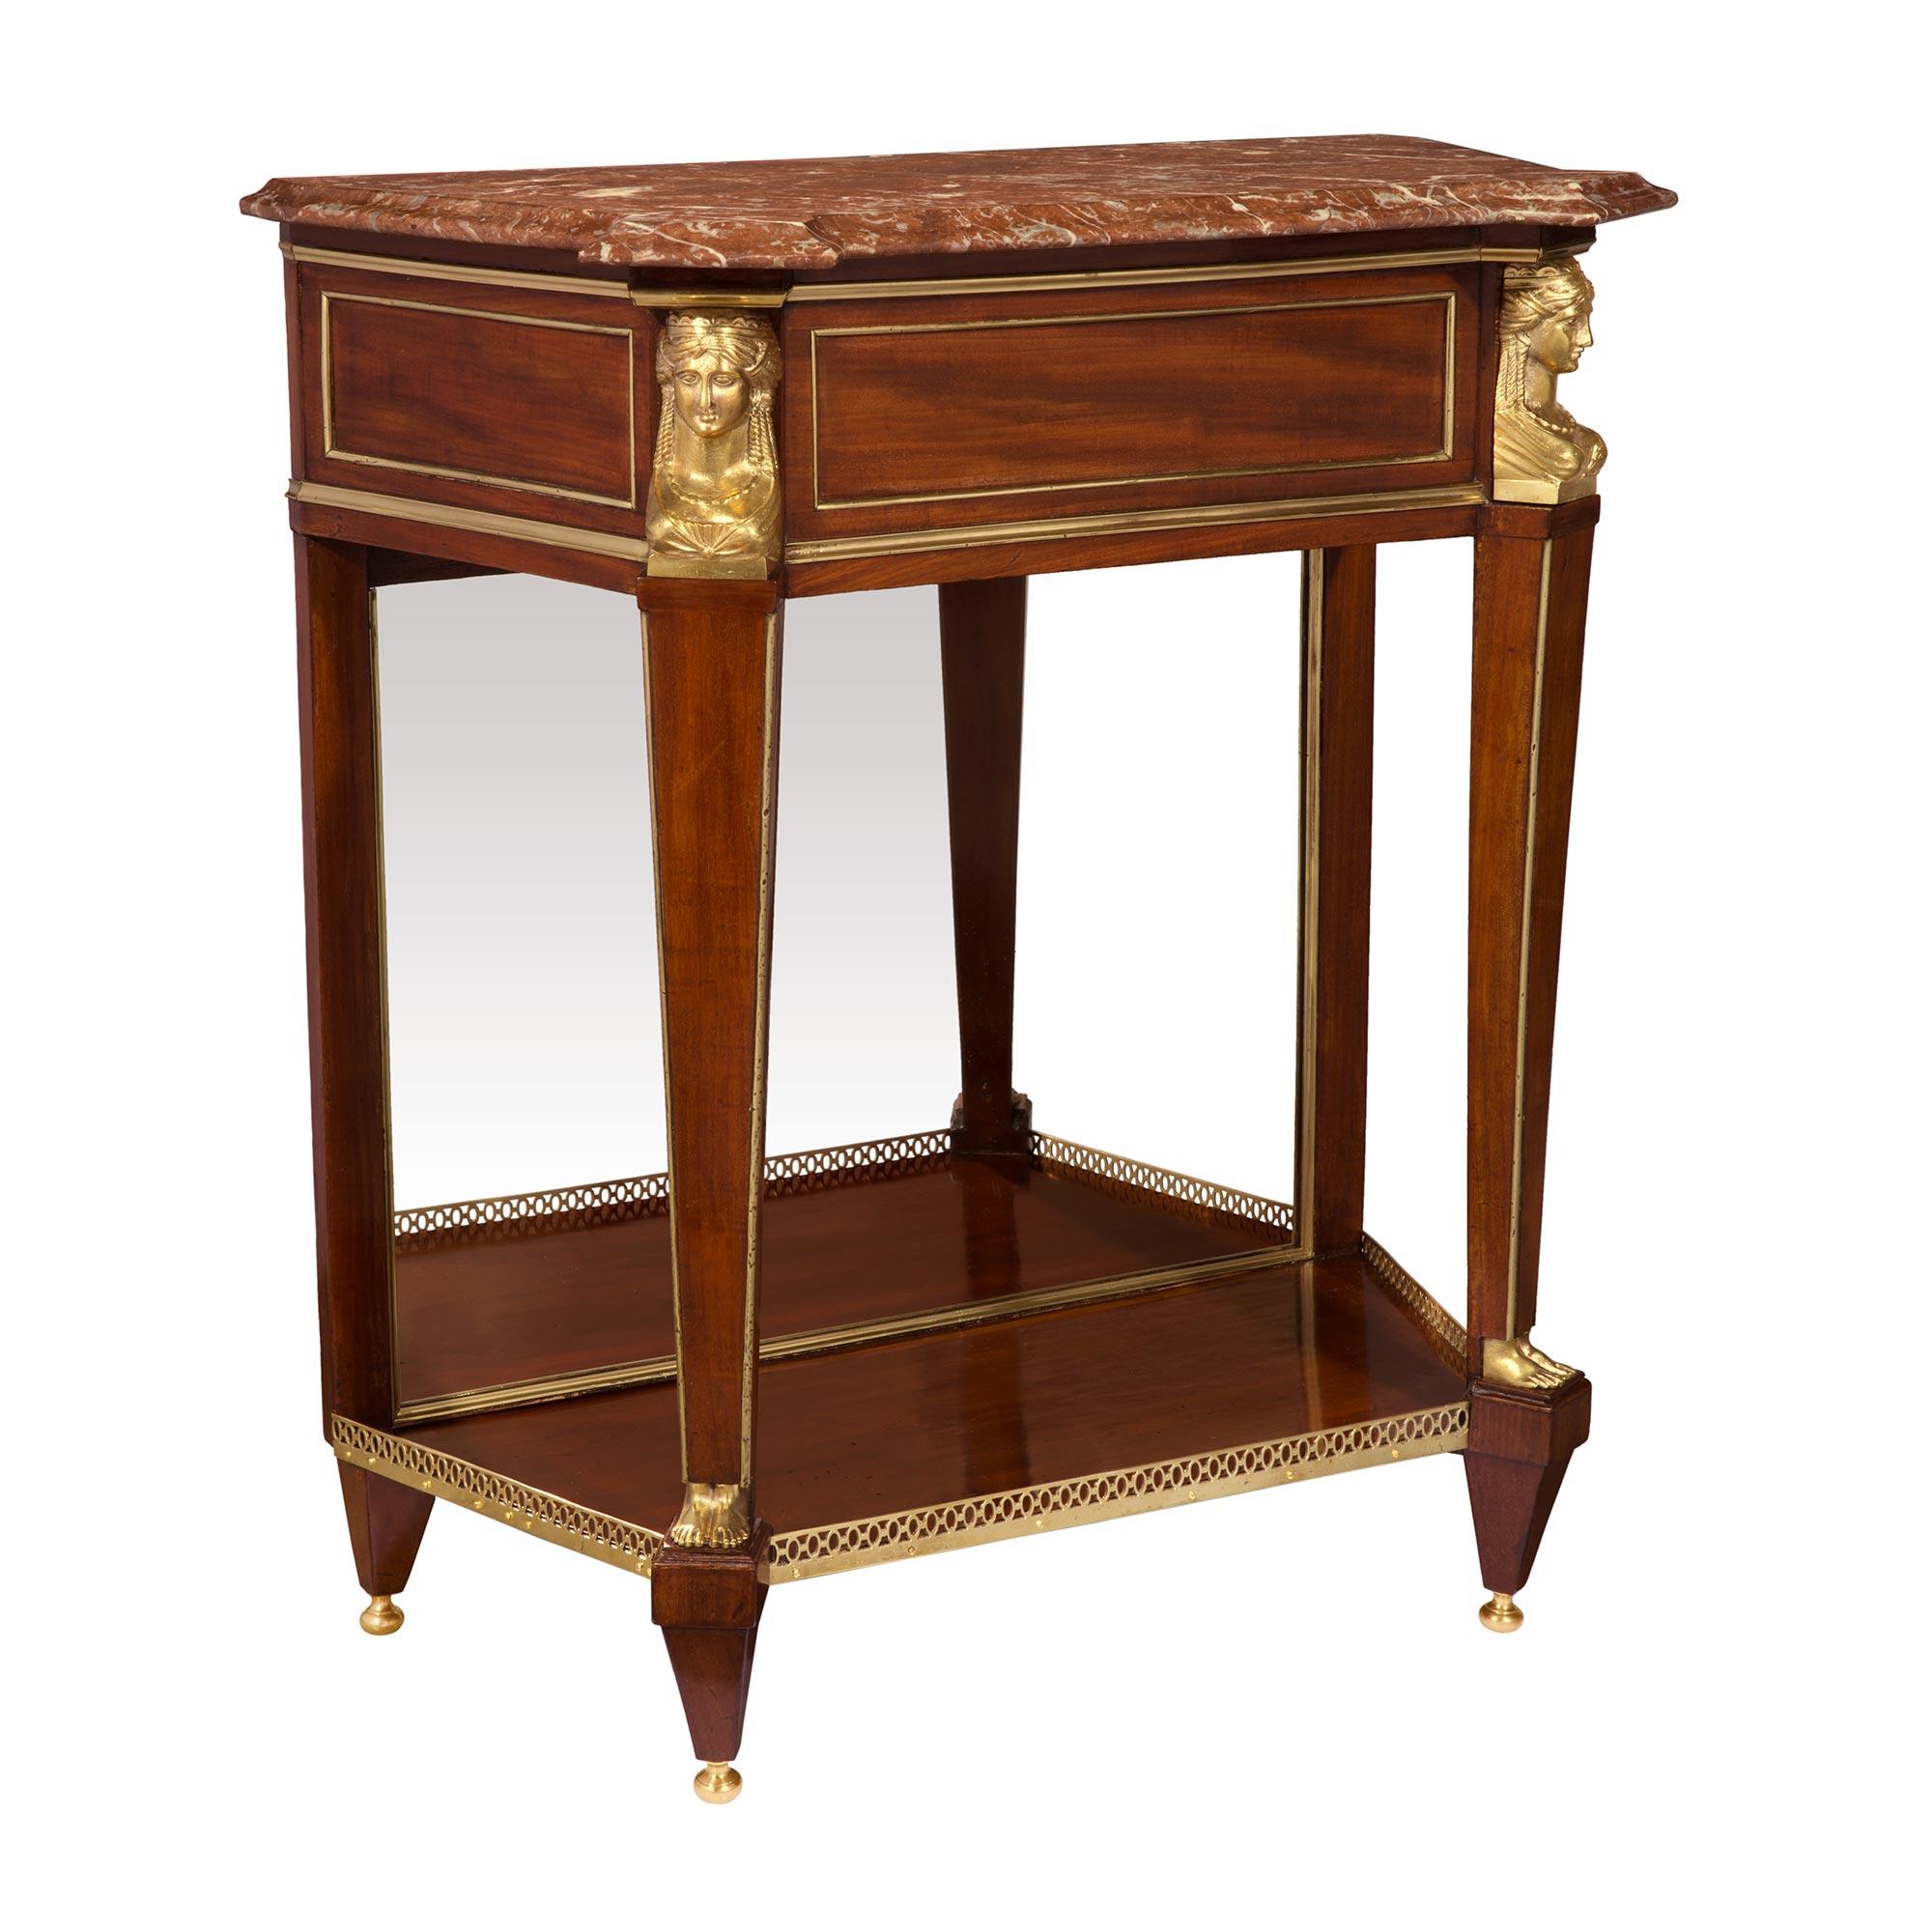 French 19th Century Neoclassical Style Mahogany, Ormolu and Marble Console In Good Condition For Sale In West Palm Beach, FL